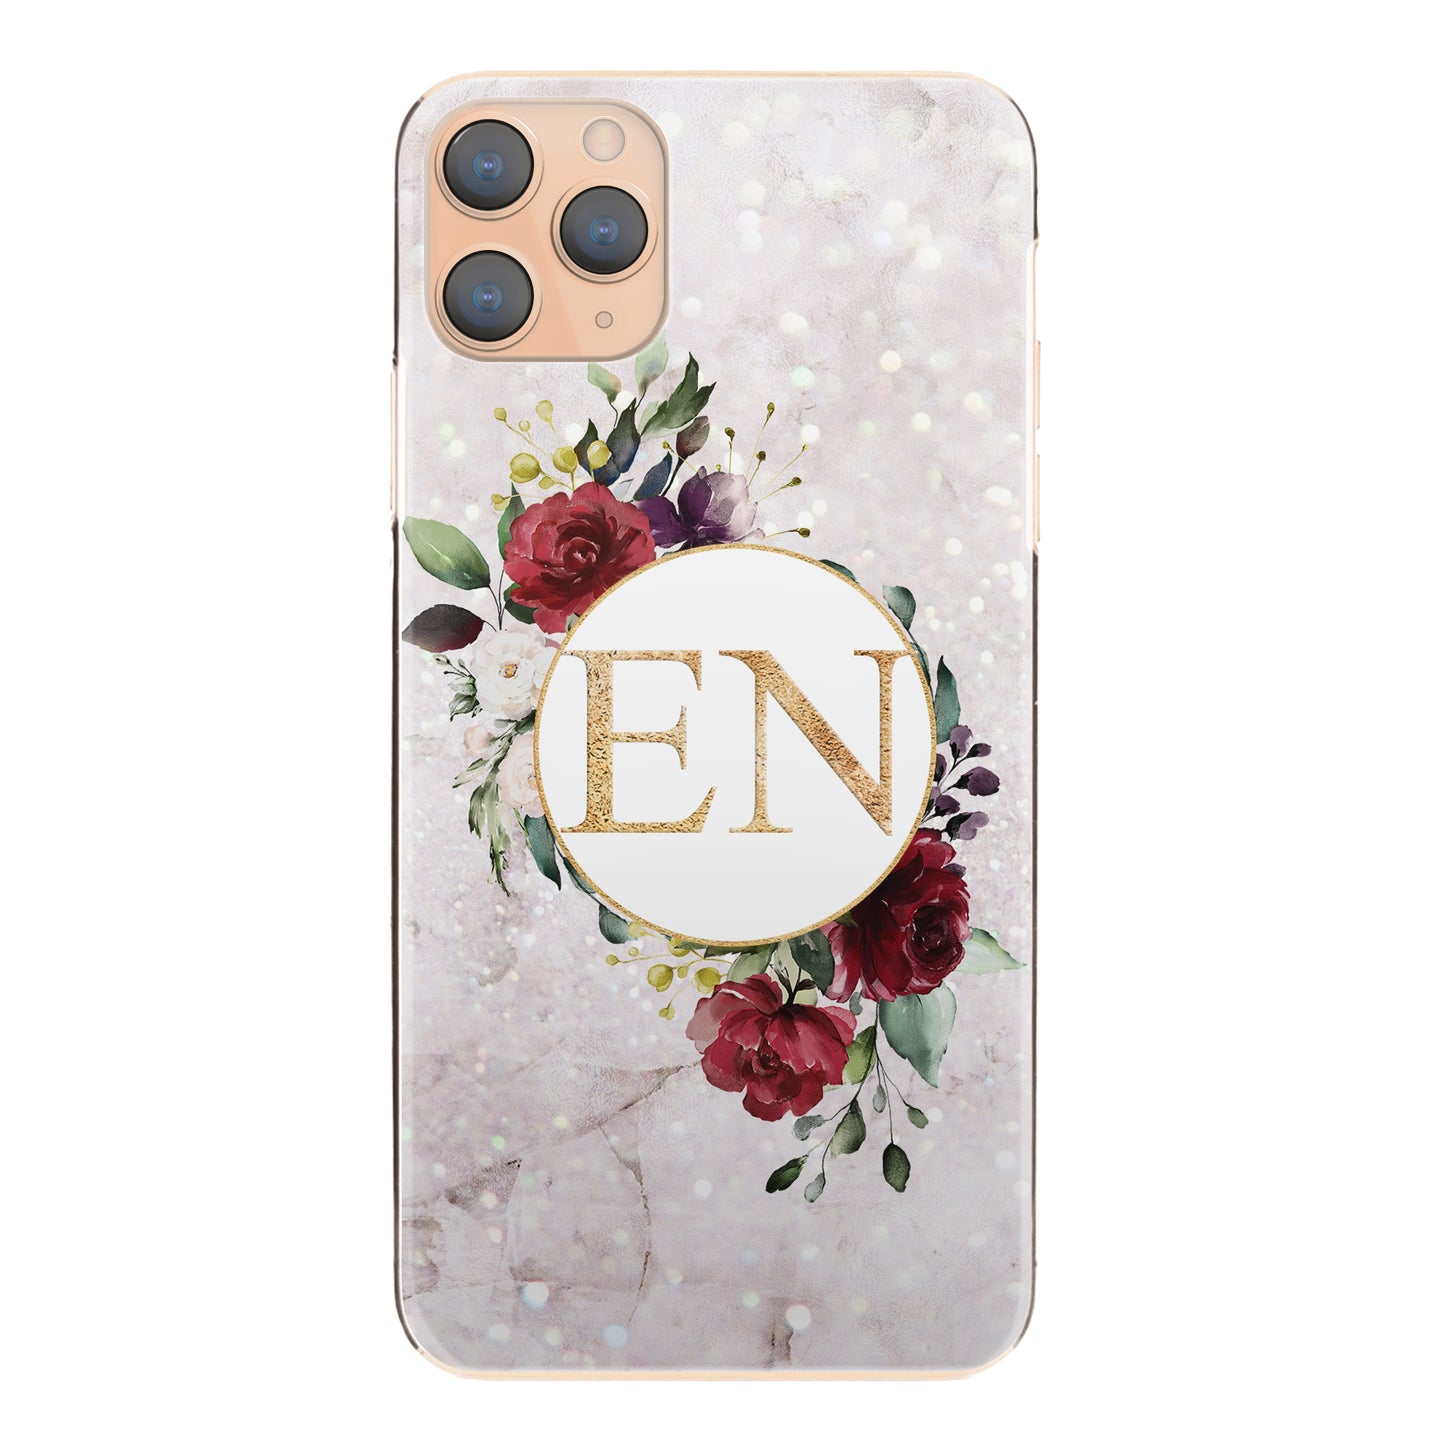 Personalised Honor Phone Hard Case with Floral Gold Initials on Crystal Marble